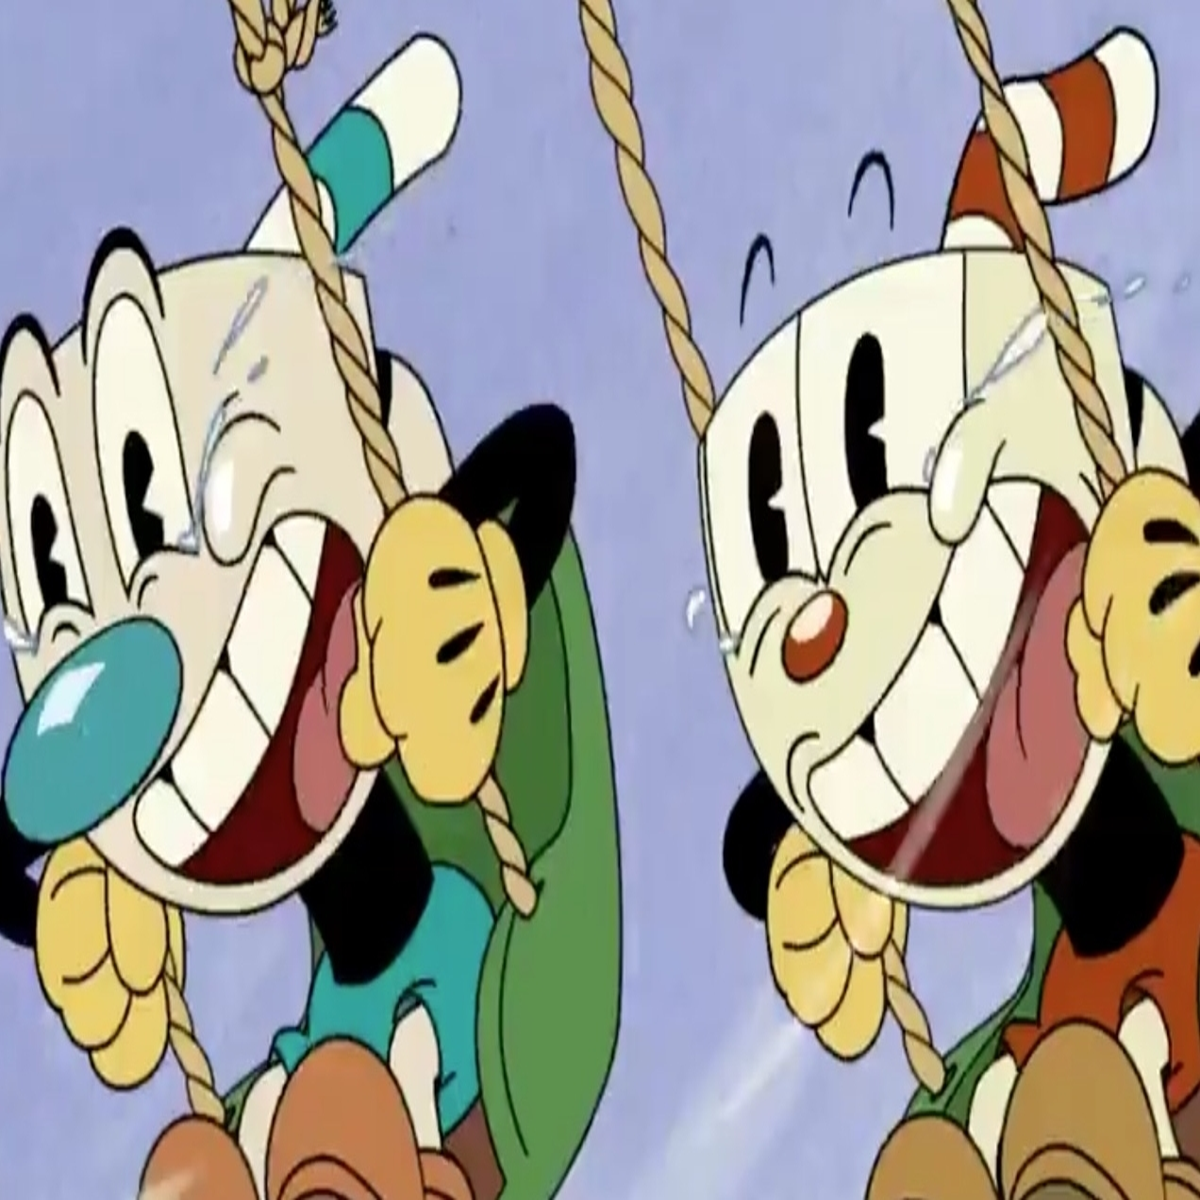 The Cuphead Show' Season 2 Coming to Netflix This Summer - CNET